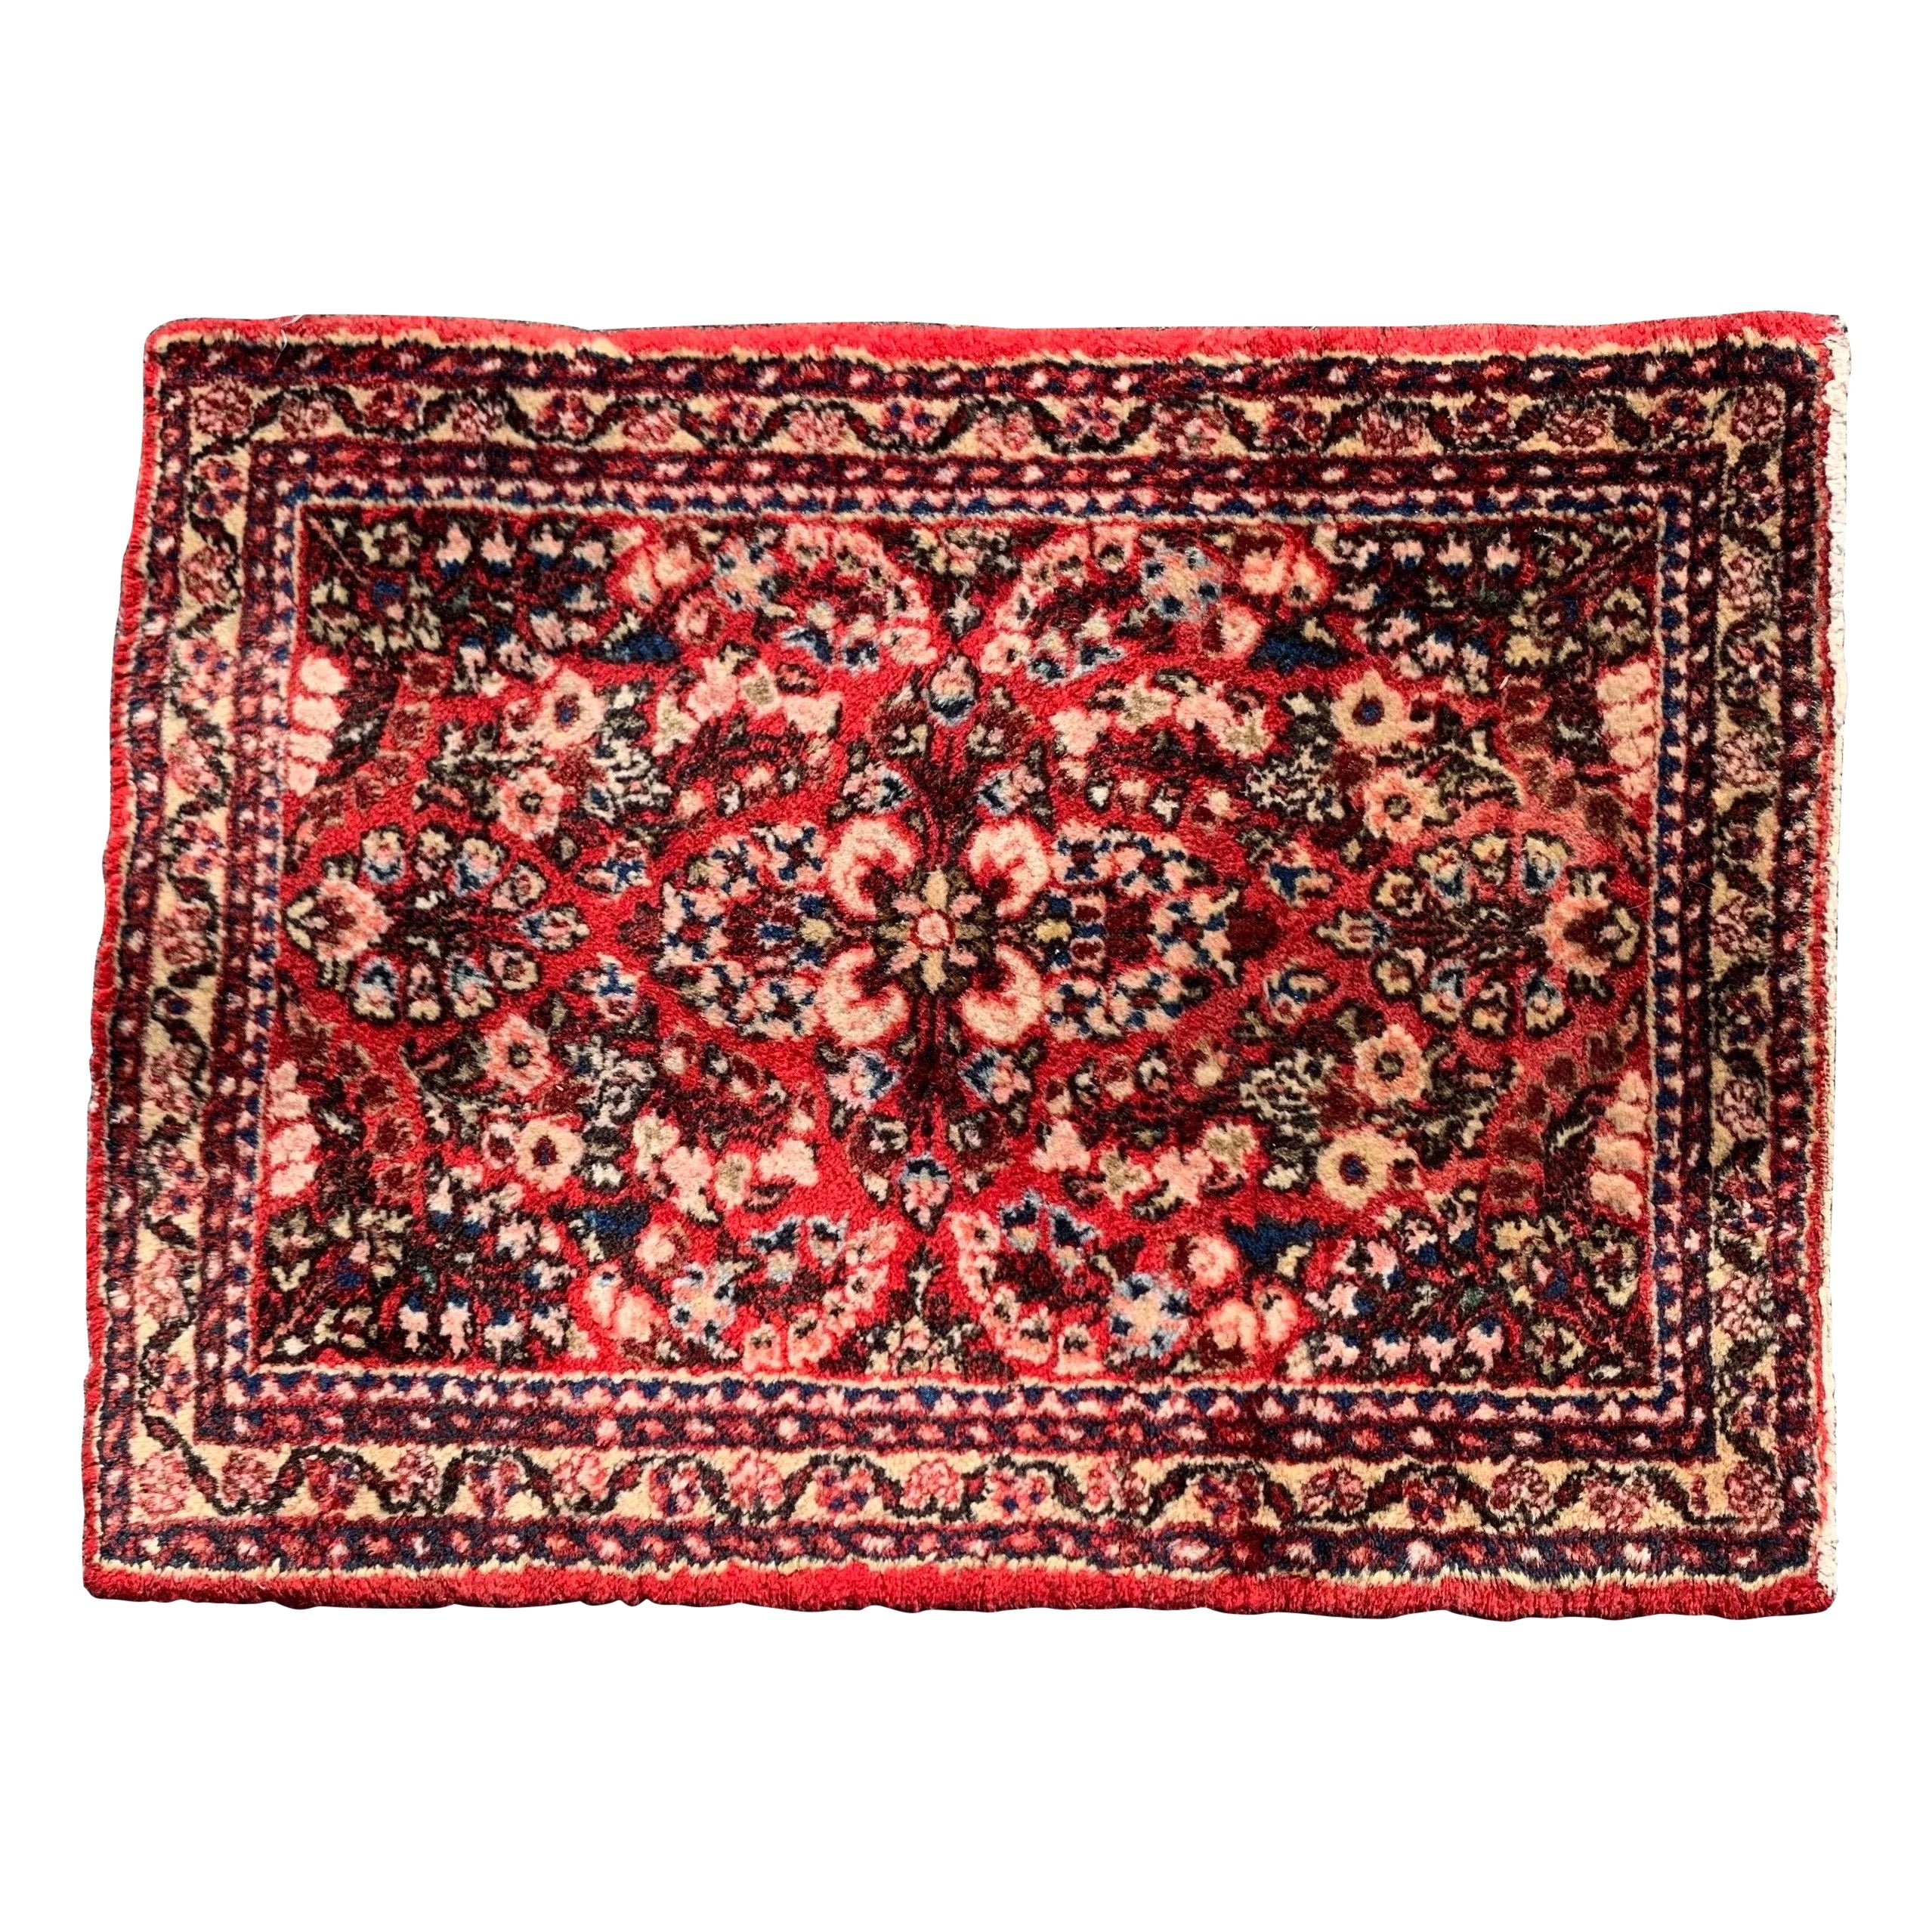 Antique Red Floral Sarouk Small Mini Persian Rug c. 1920s For Sale